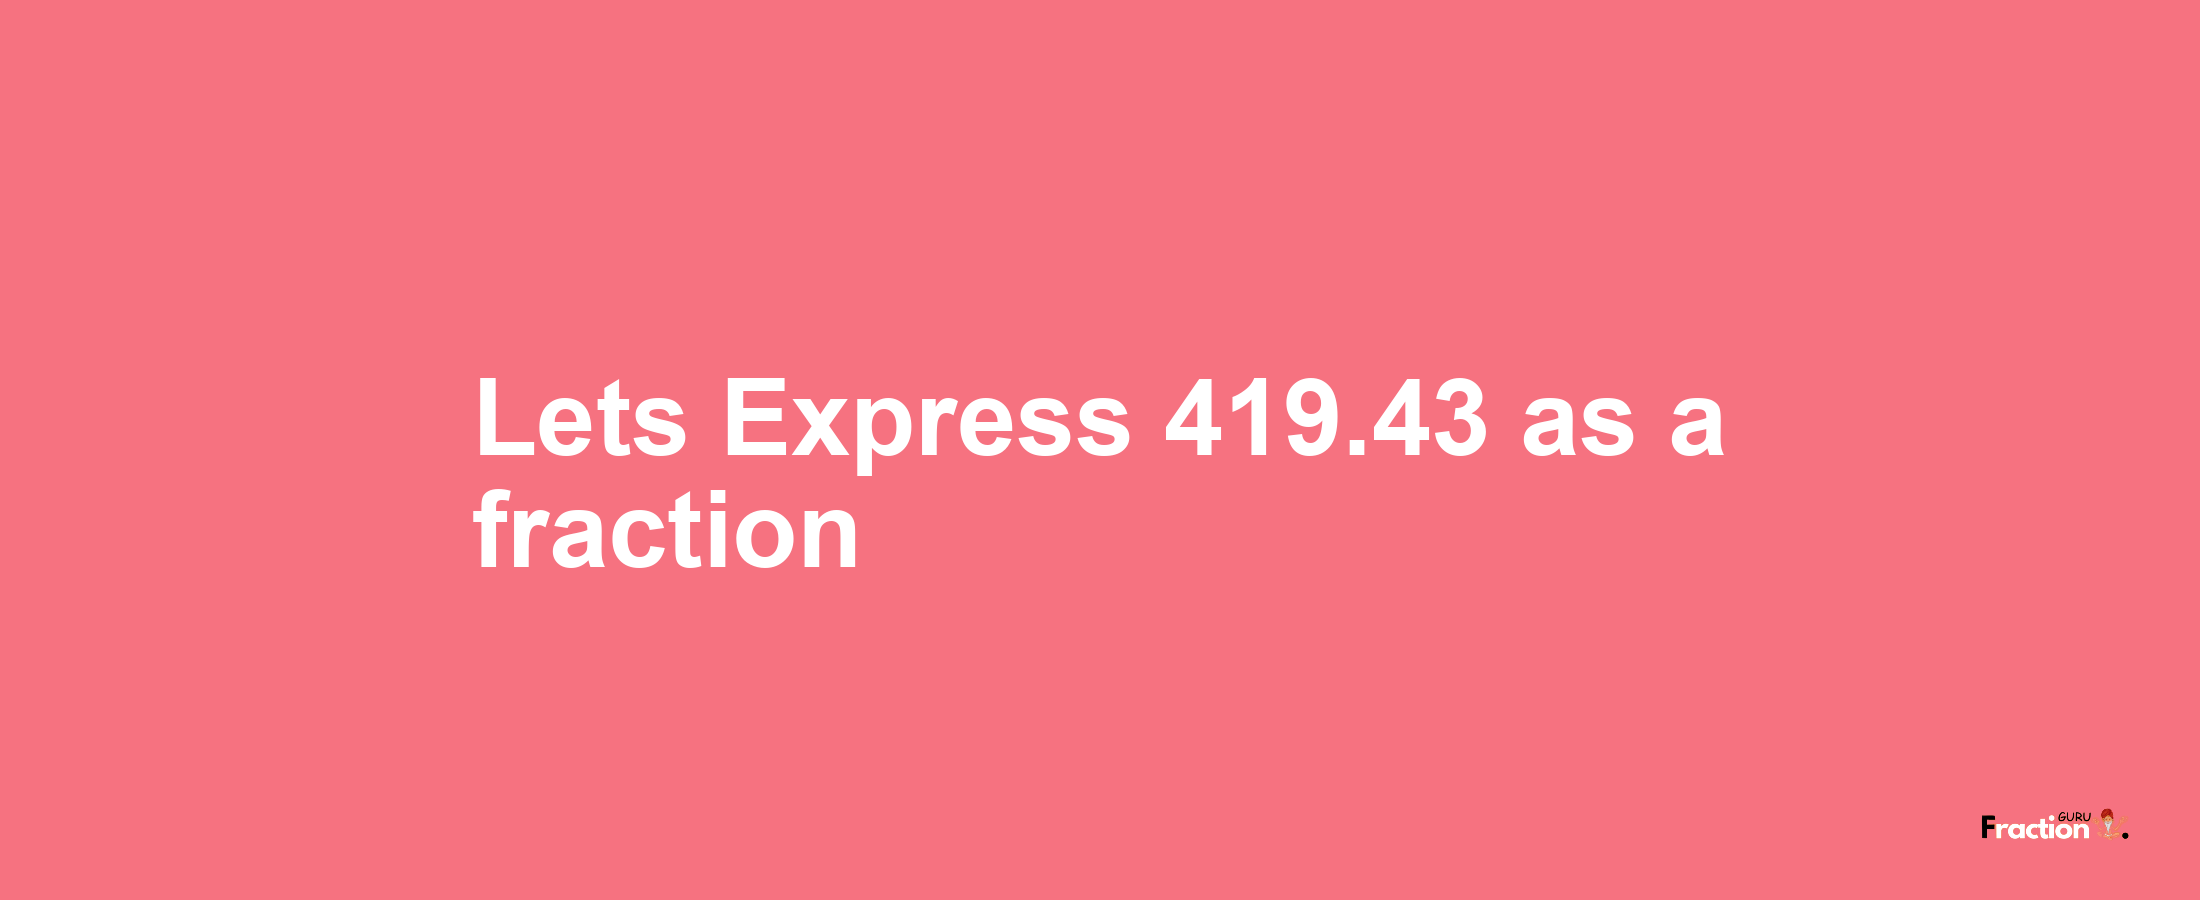 Lets Express 419.43 as afraction